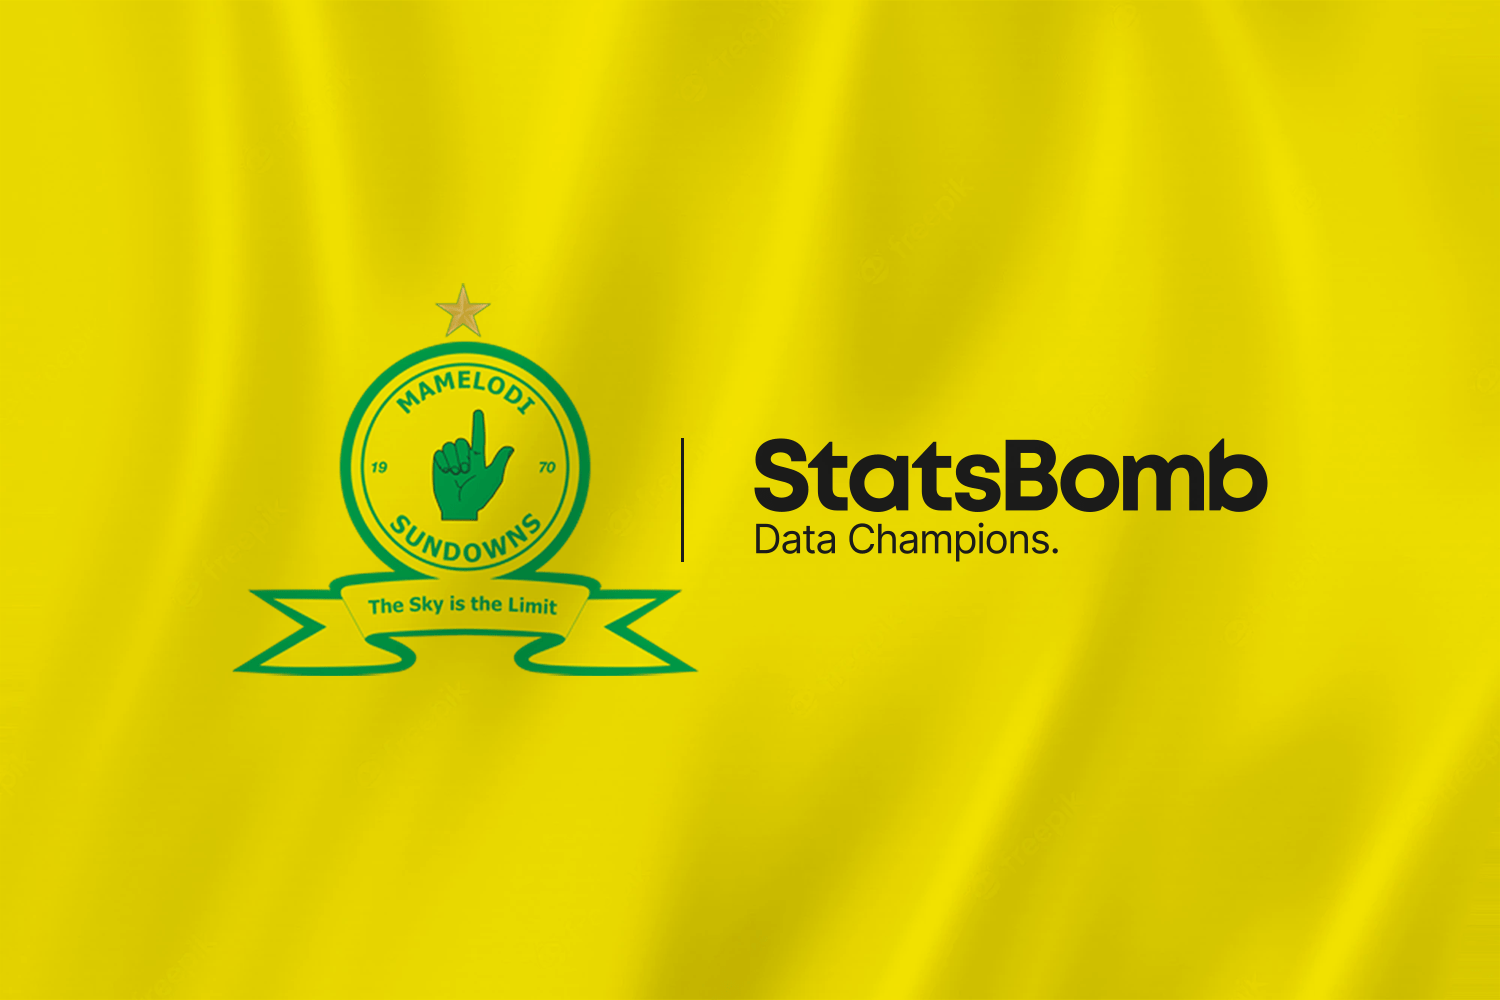 Mamelodi Sundowns Become The Latest African Club To Sign Partnership With StatsBomb